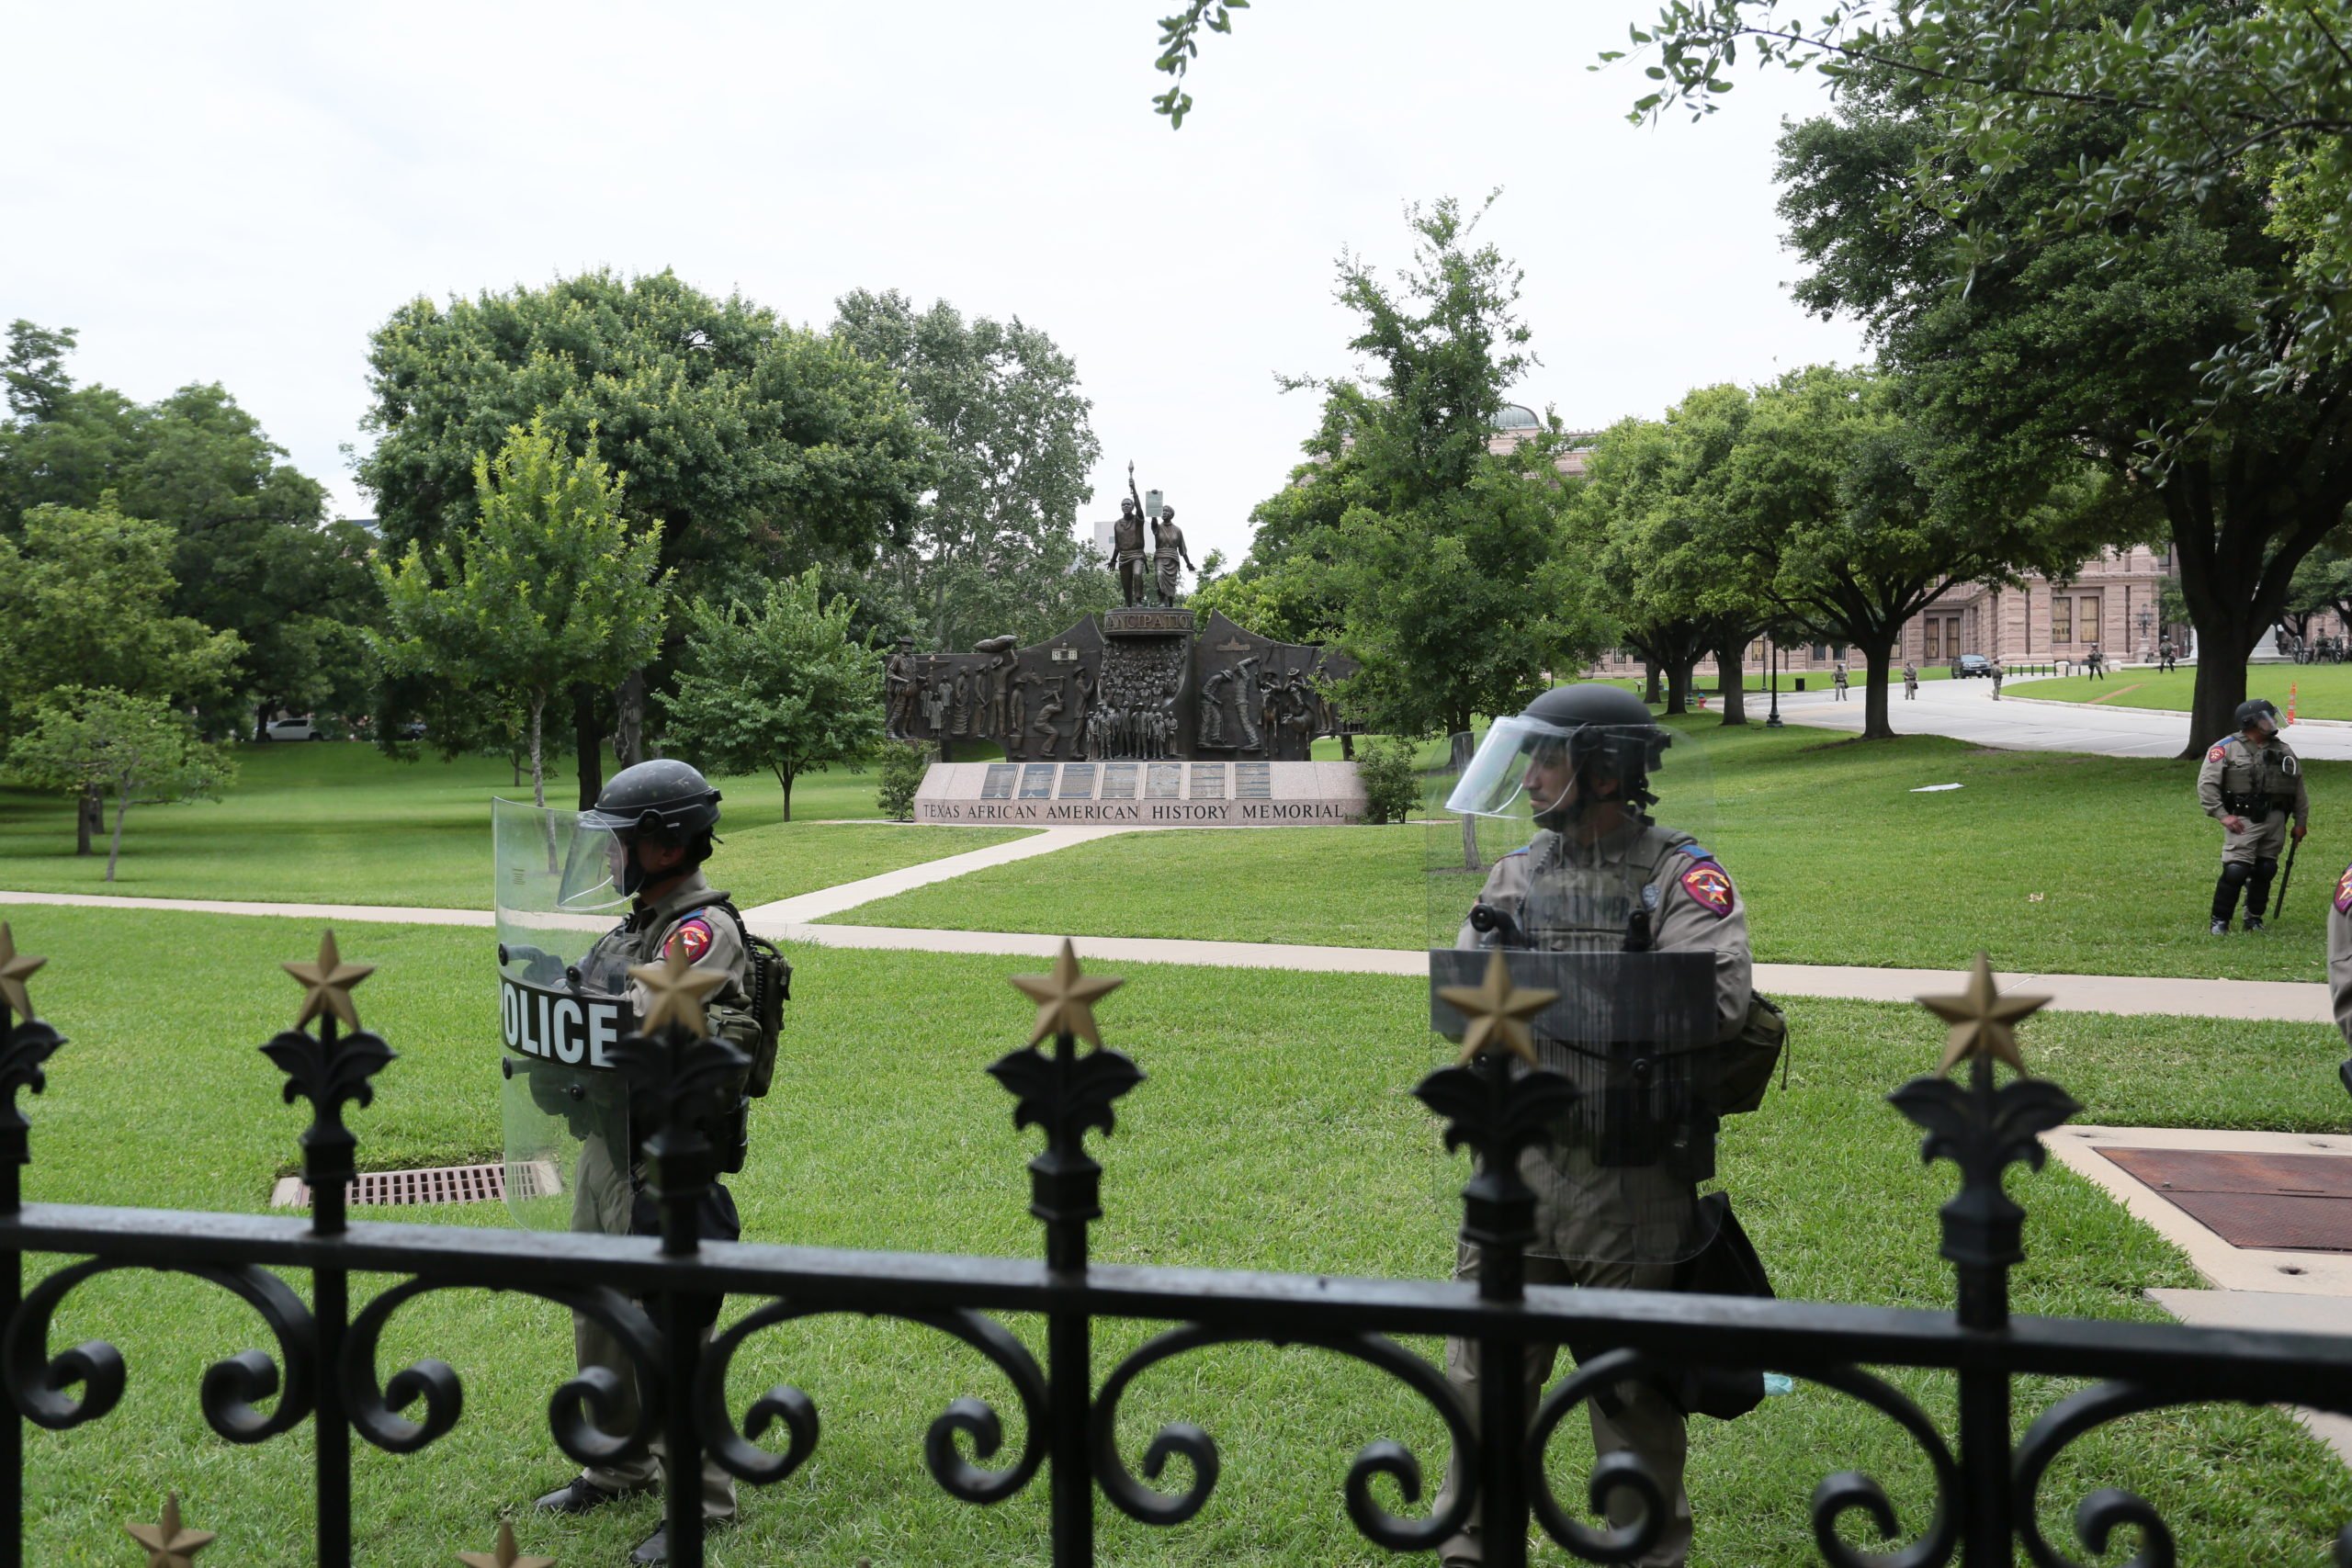 State troopers guard the South Lawn at the Texas Capitol on Sunday, May 31. The Texas African American History Memorial is prominent behind them. Several Confederate monuments adorn the lawn, as well.